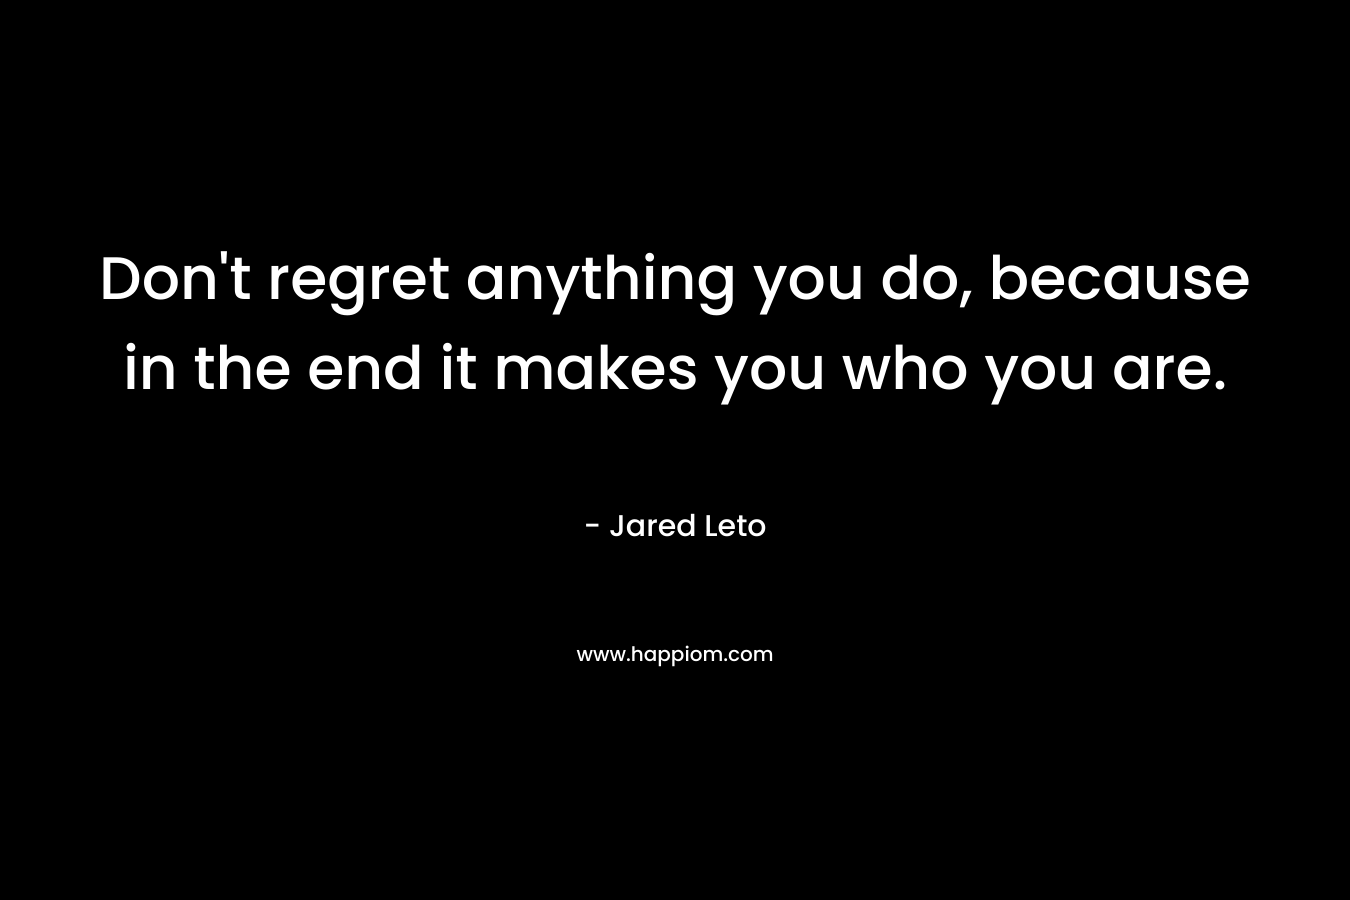 Don’t regret anything you do, because in the end it makes you who you are. – Jared Leto